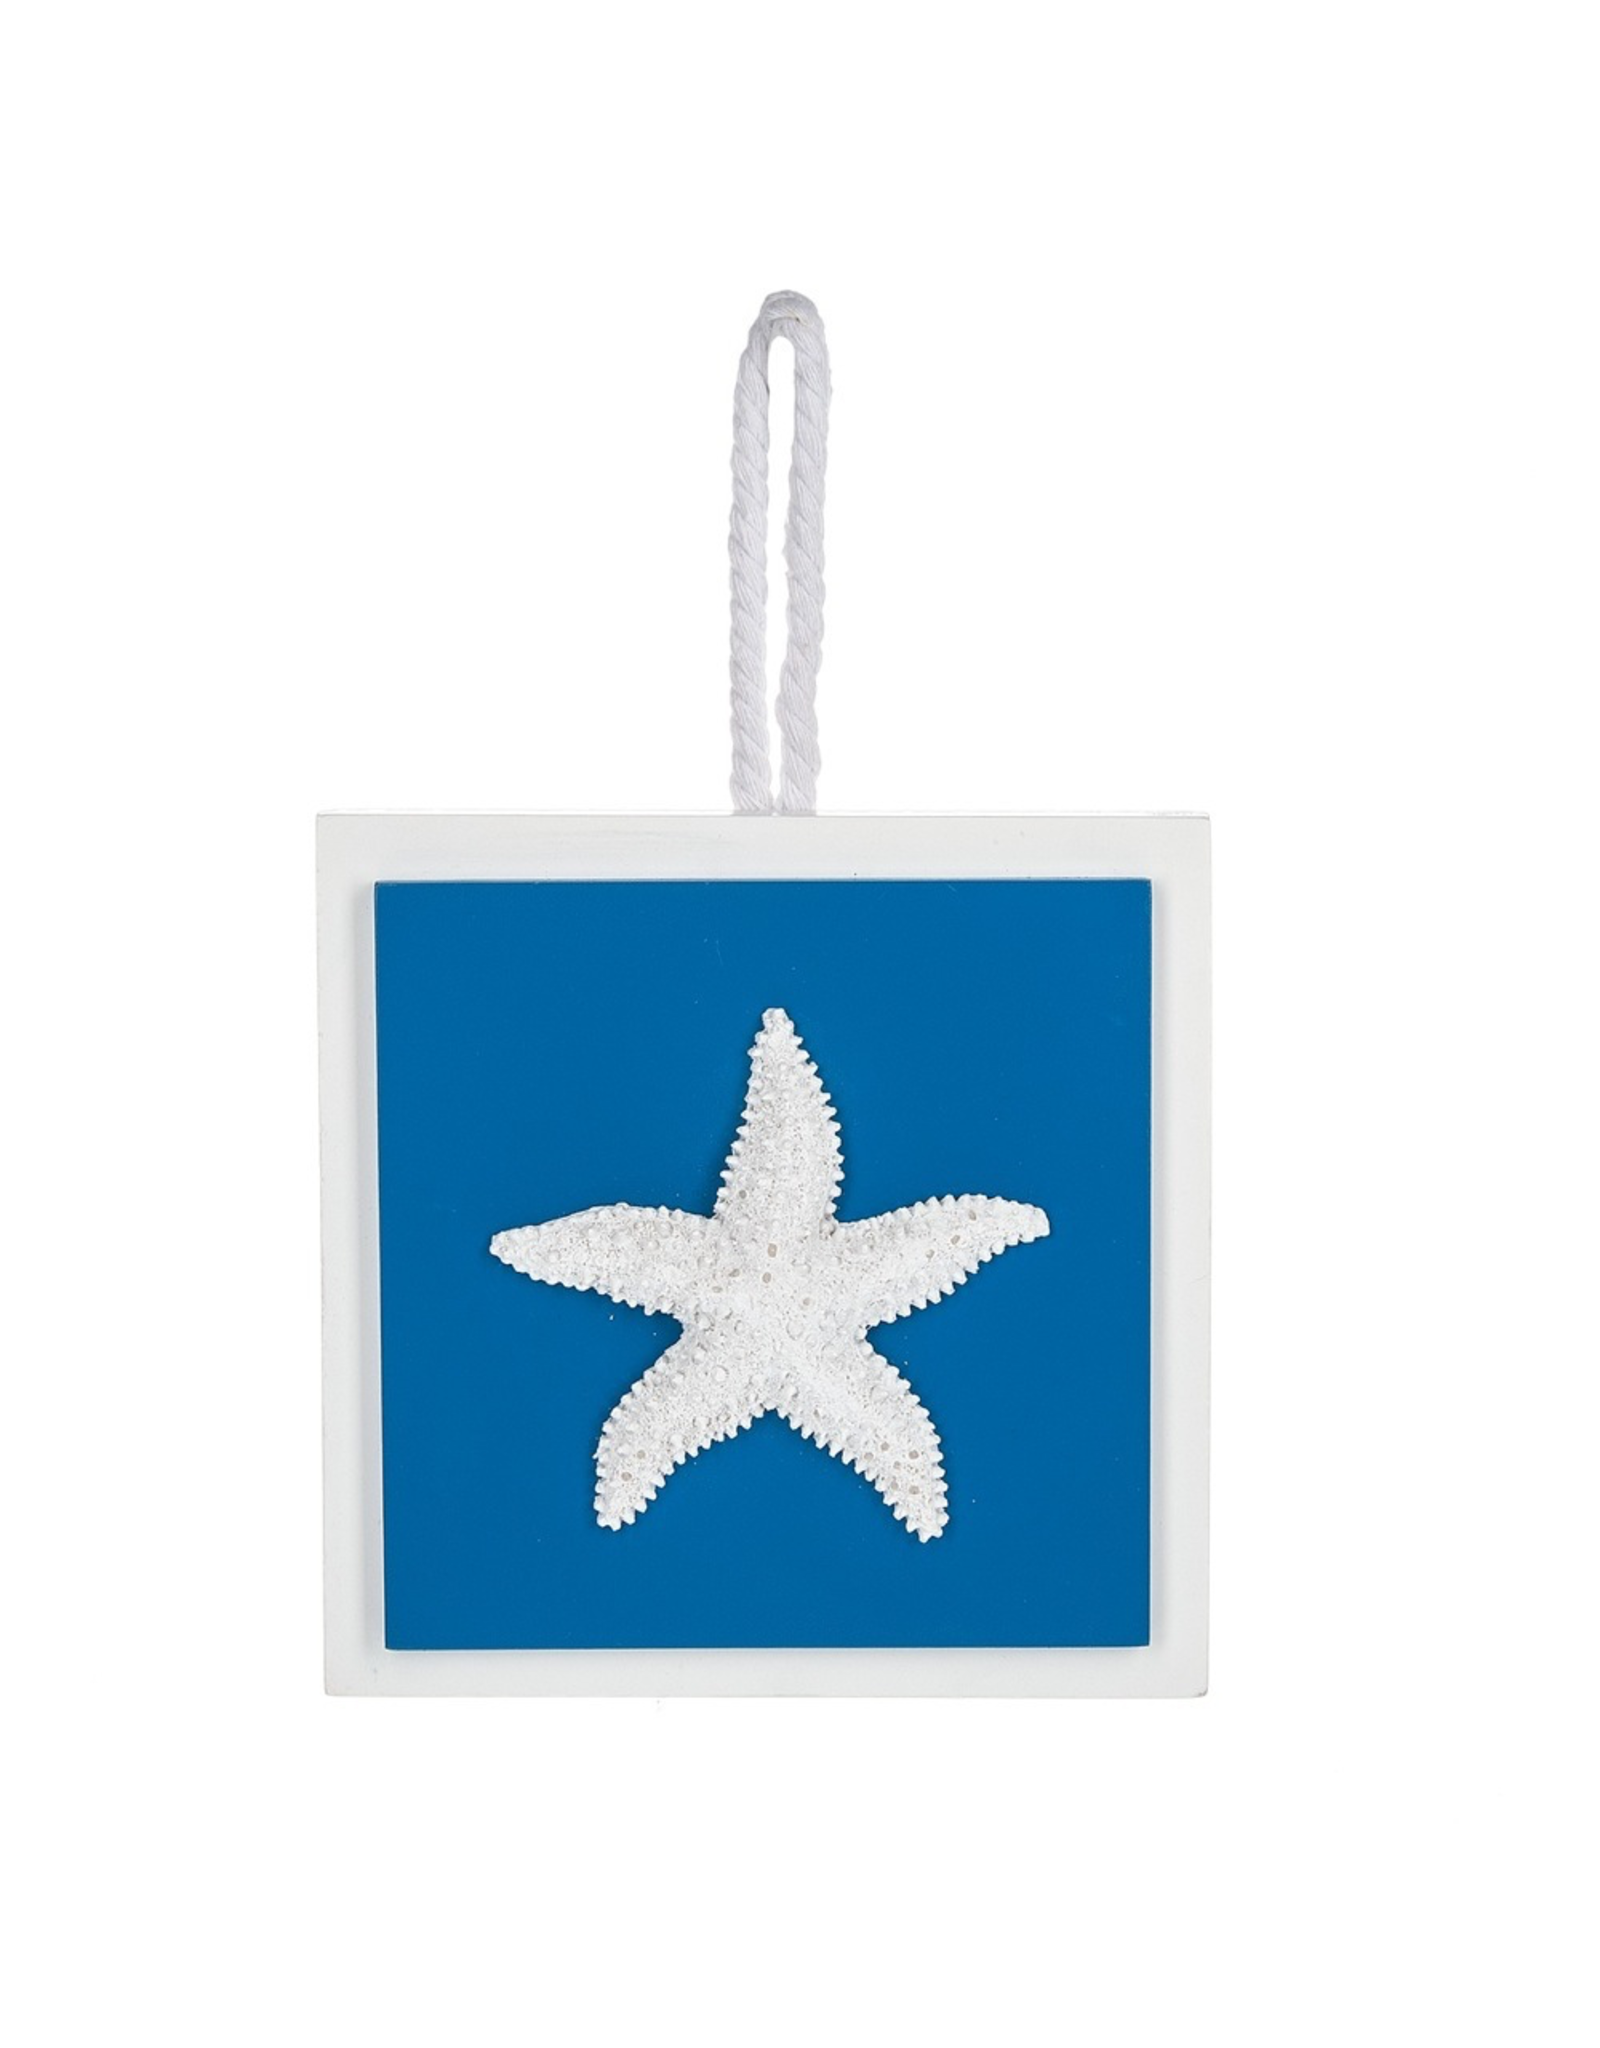 Midwest-CBK Decorative Square Wall Plaque on Rope Hanger Starfish